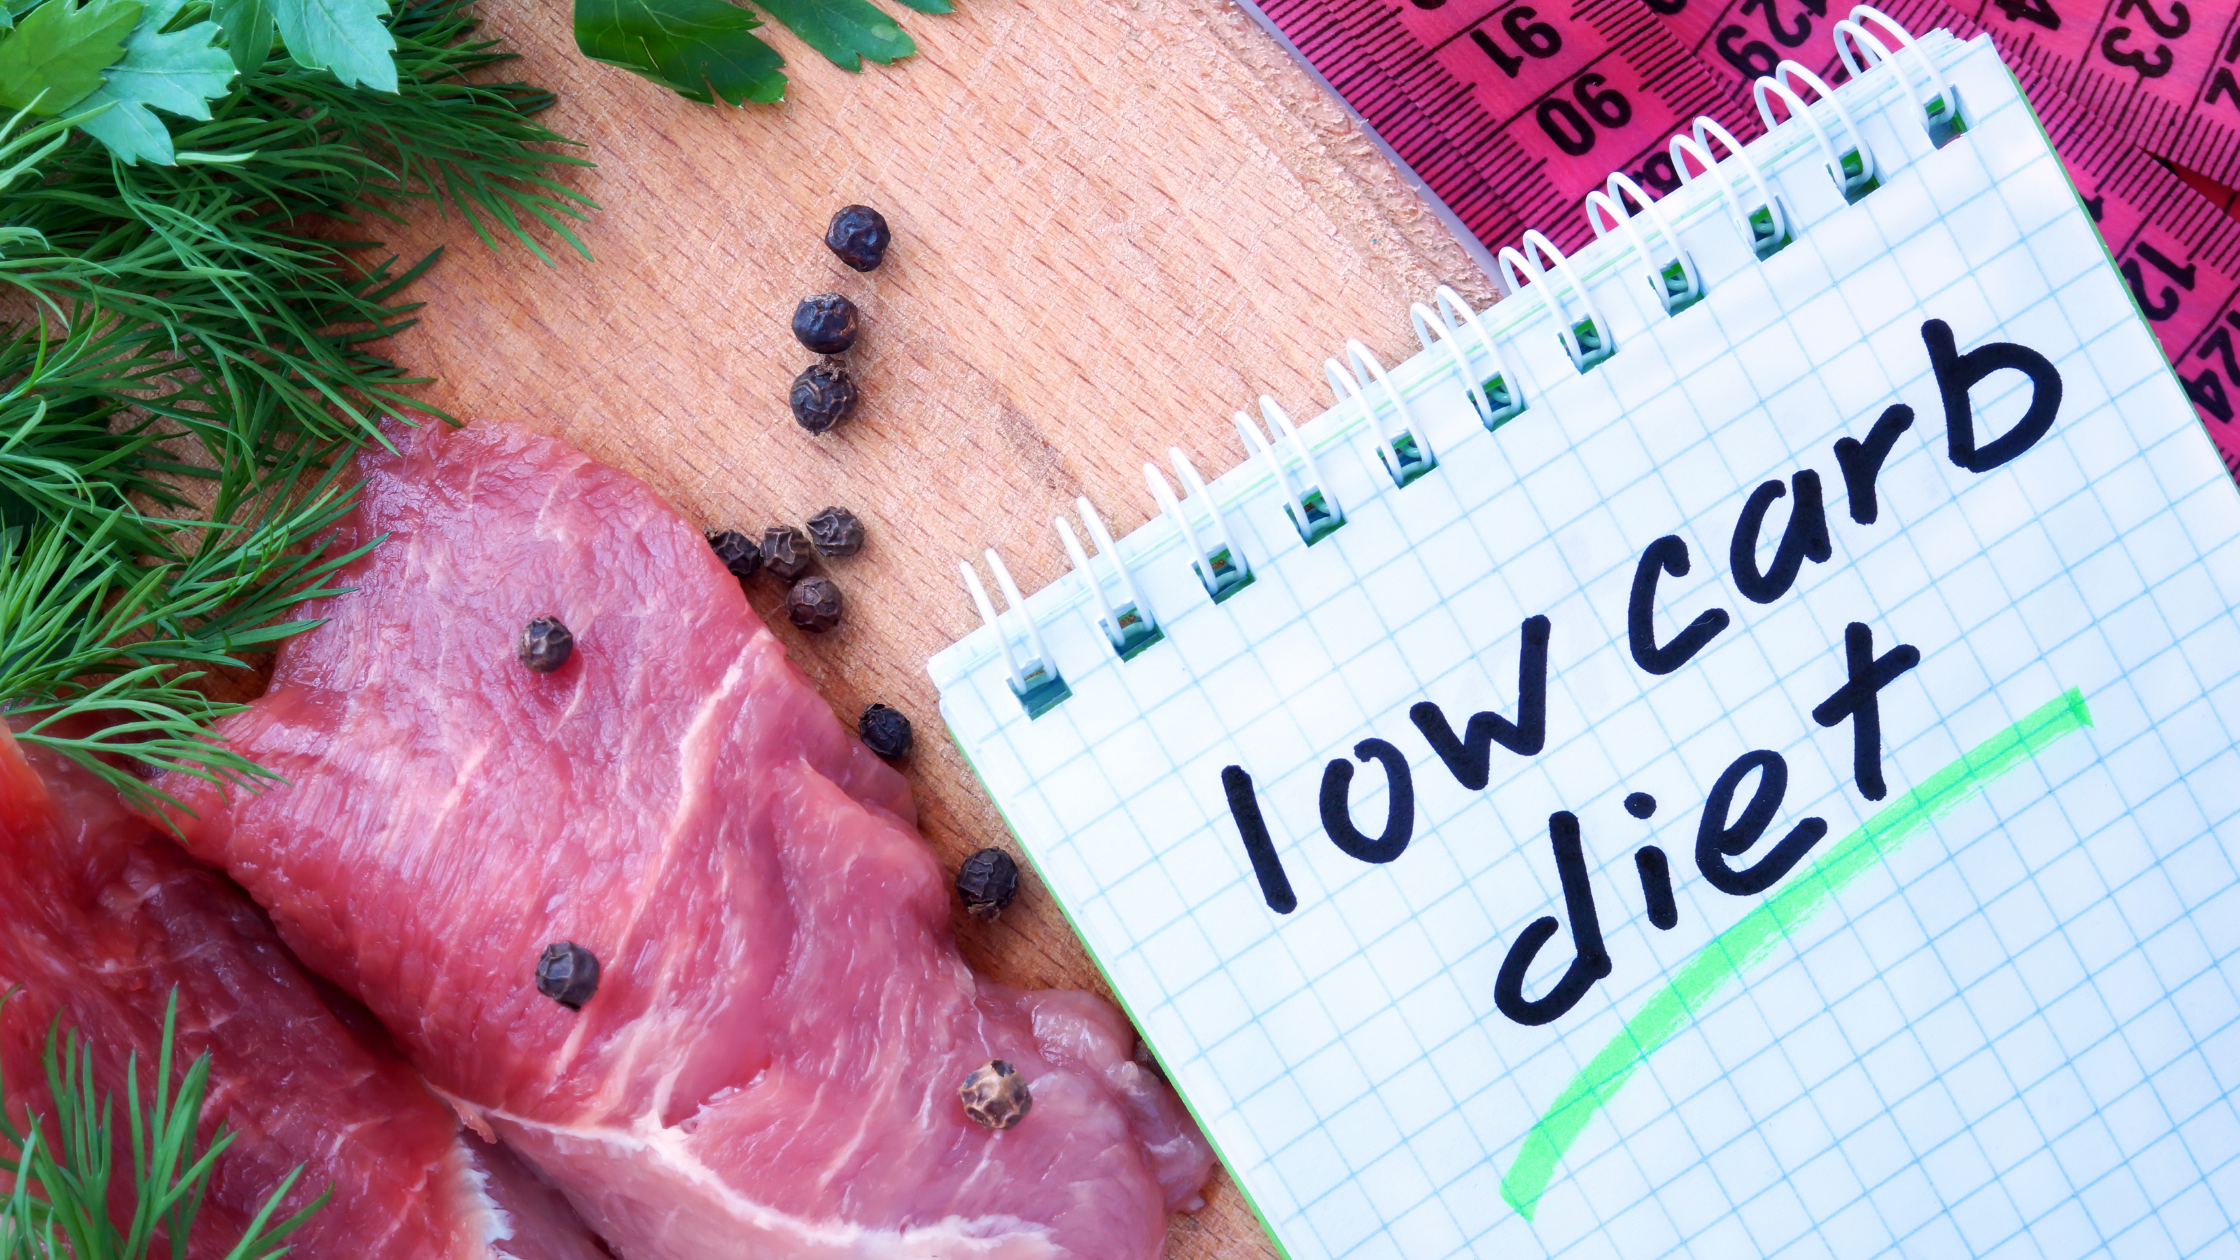 A notepad with the words "Low Carb Diet" written on it lying on a wooden table next to sliced meat, berries, and herbs